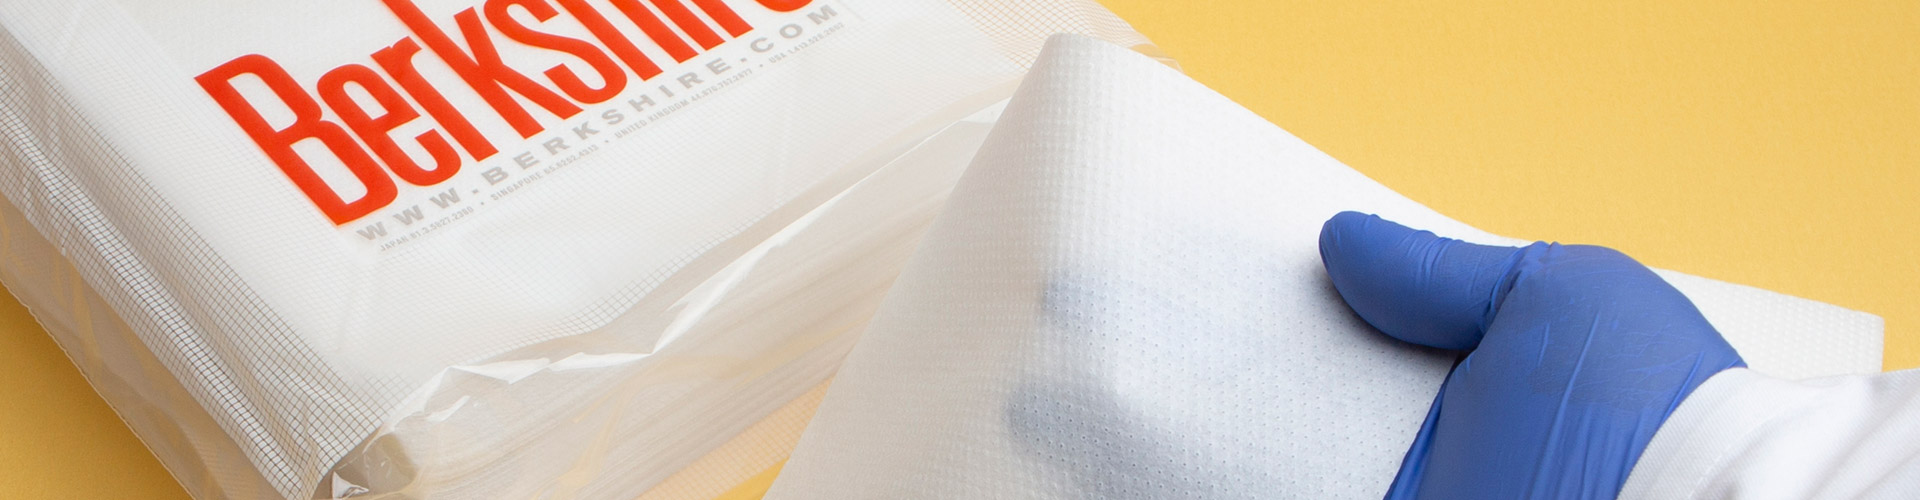 Pro-Wipe 750 cleanroom wipes for acids